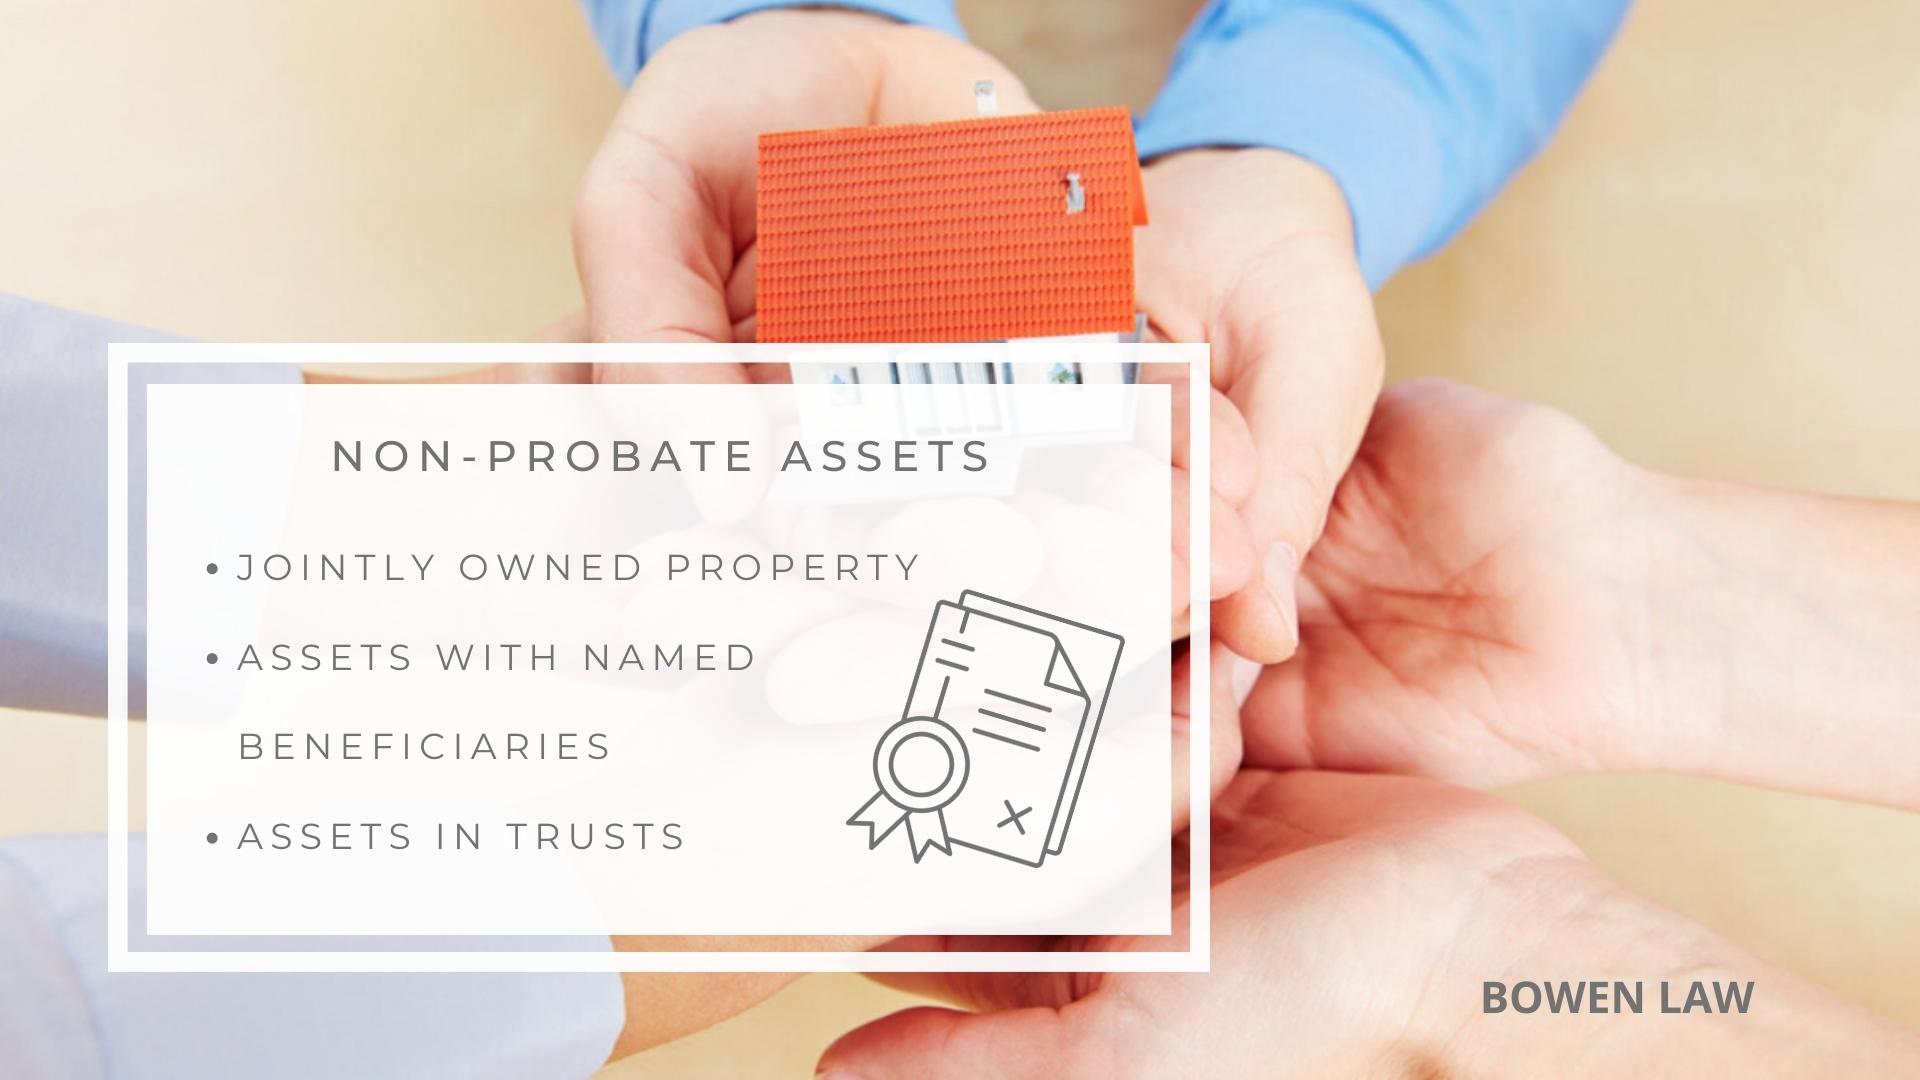 Infographic image of non-probate assets